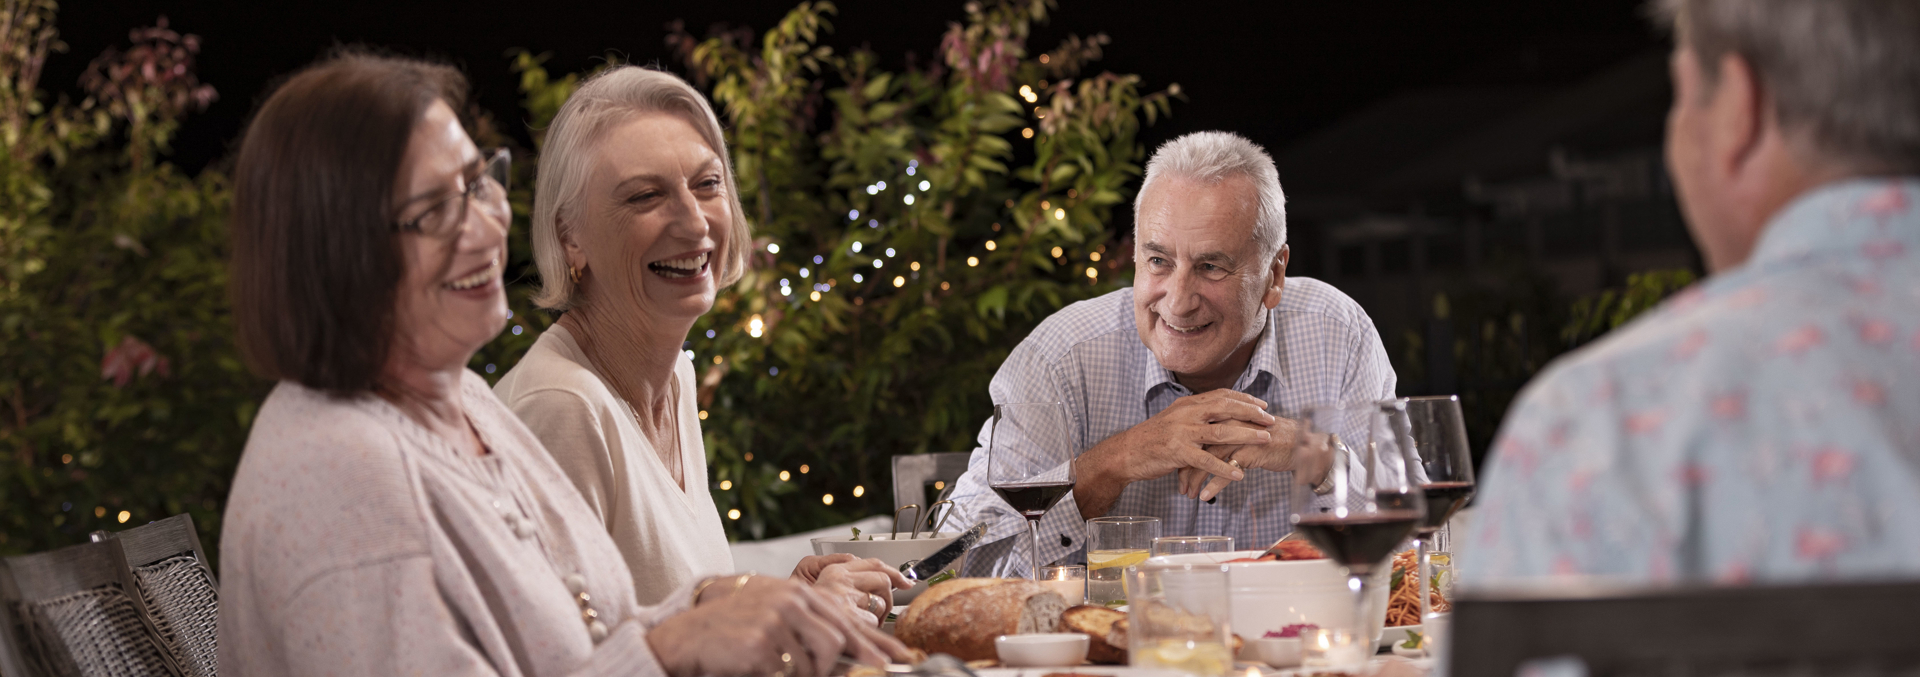 A group of four adult friends smile and laugh at each other whilst enjoying a glass of wine and dinner meal at night time.